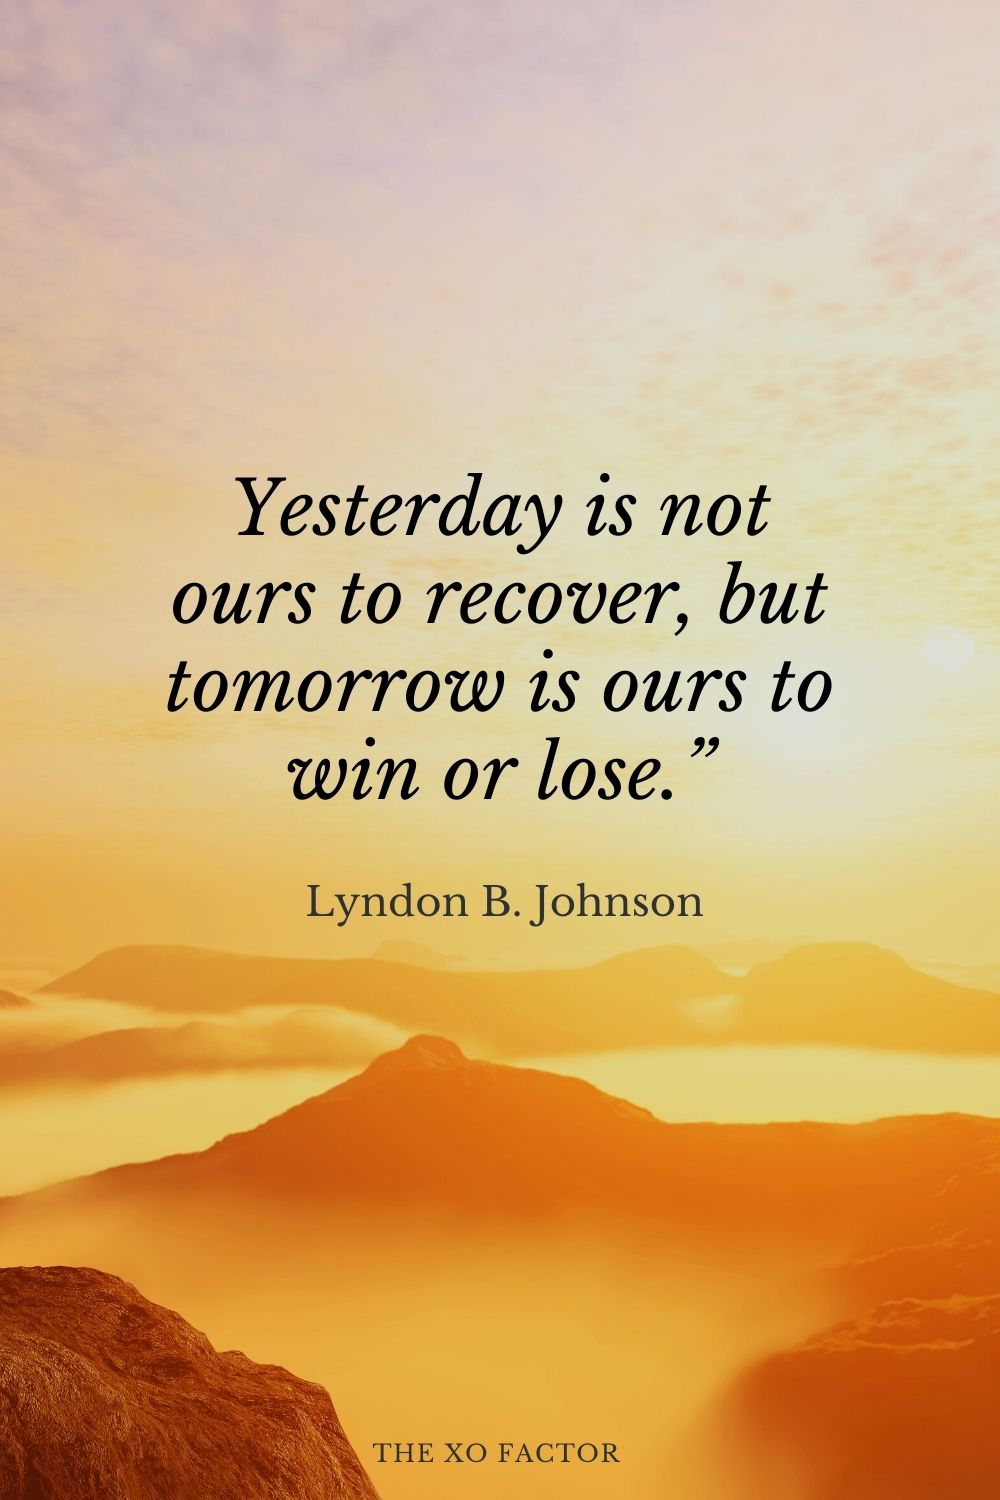 Yesterday is not ours to recover, but tomorrow is ours to win or lose.” Lyndon B. Johnson